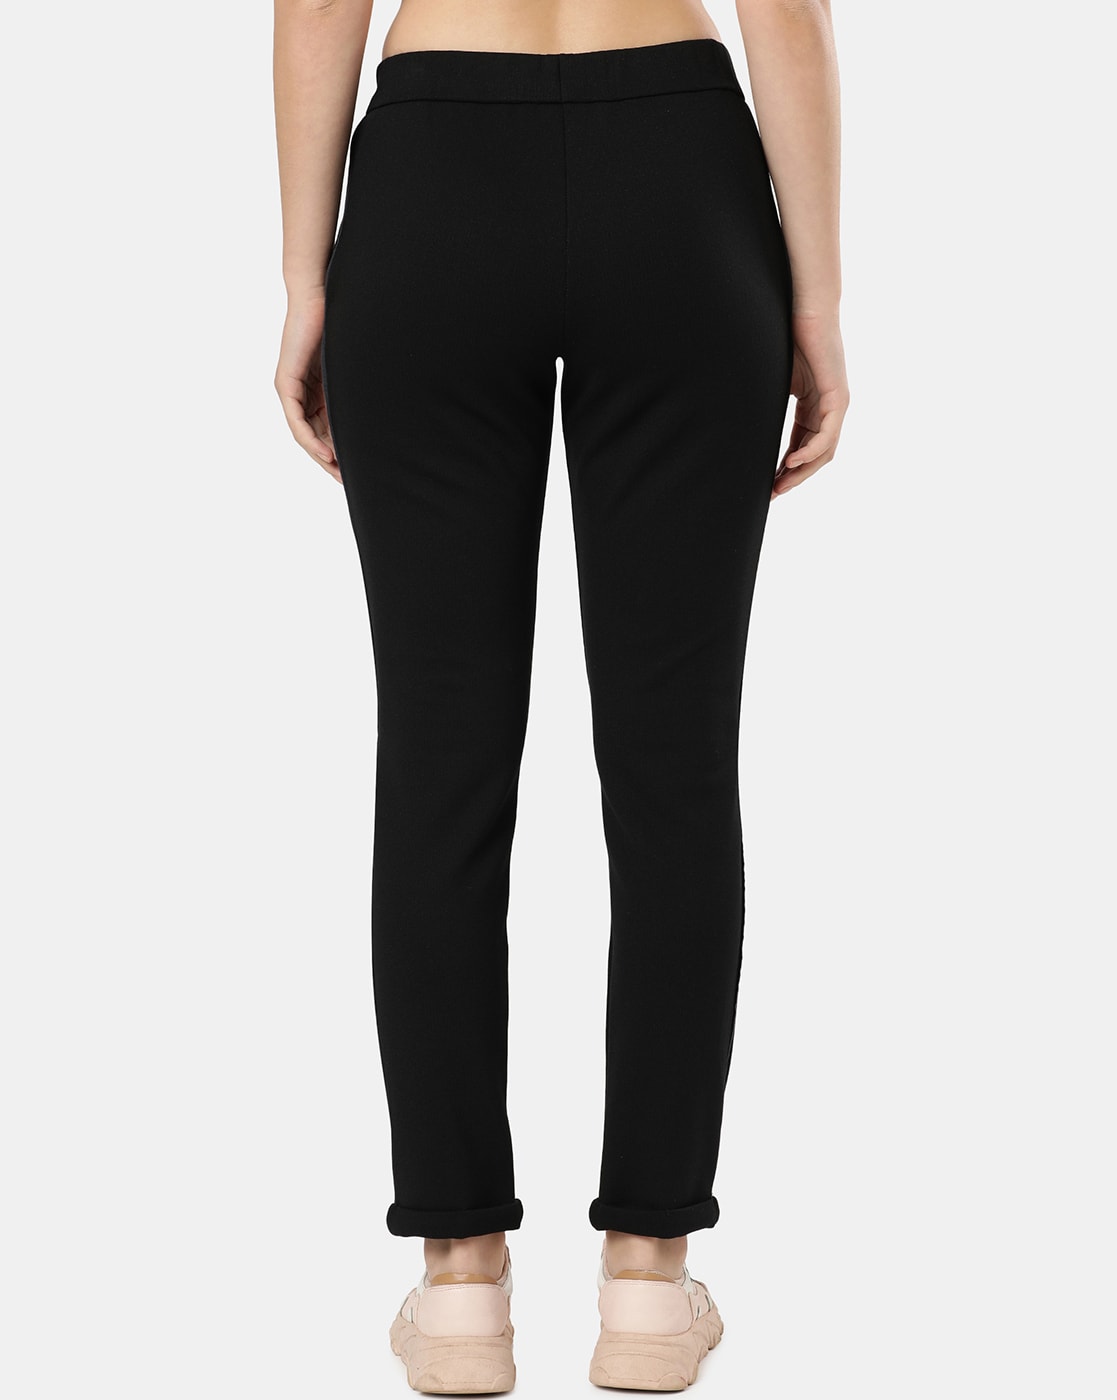 FableStreet Bottoms Pants and Trousers  Buy Fablestreet Black 4 Way Stretch  Bootcut Livin Pants Online  Nykaa Fashion